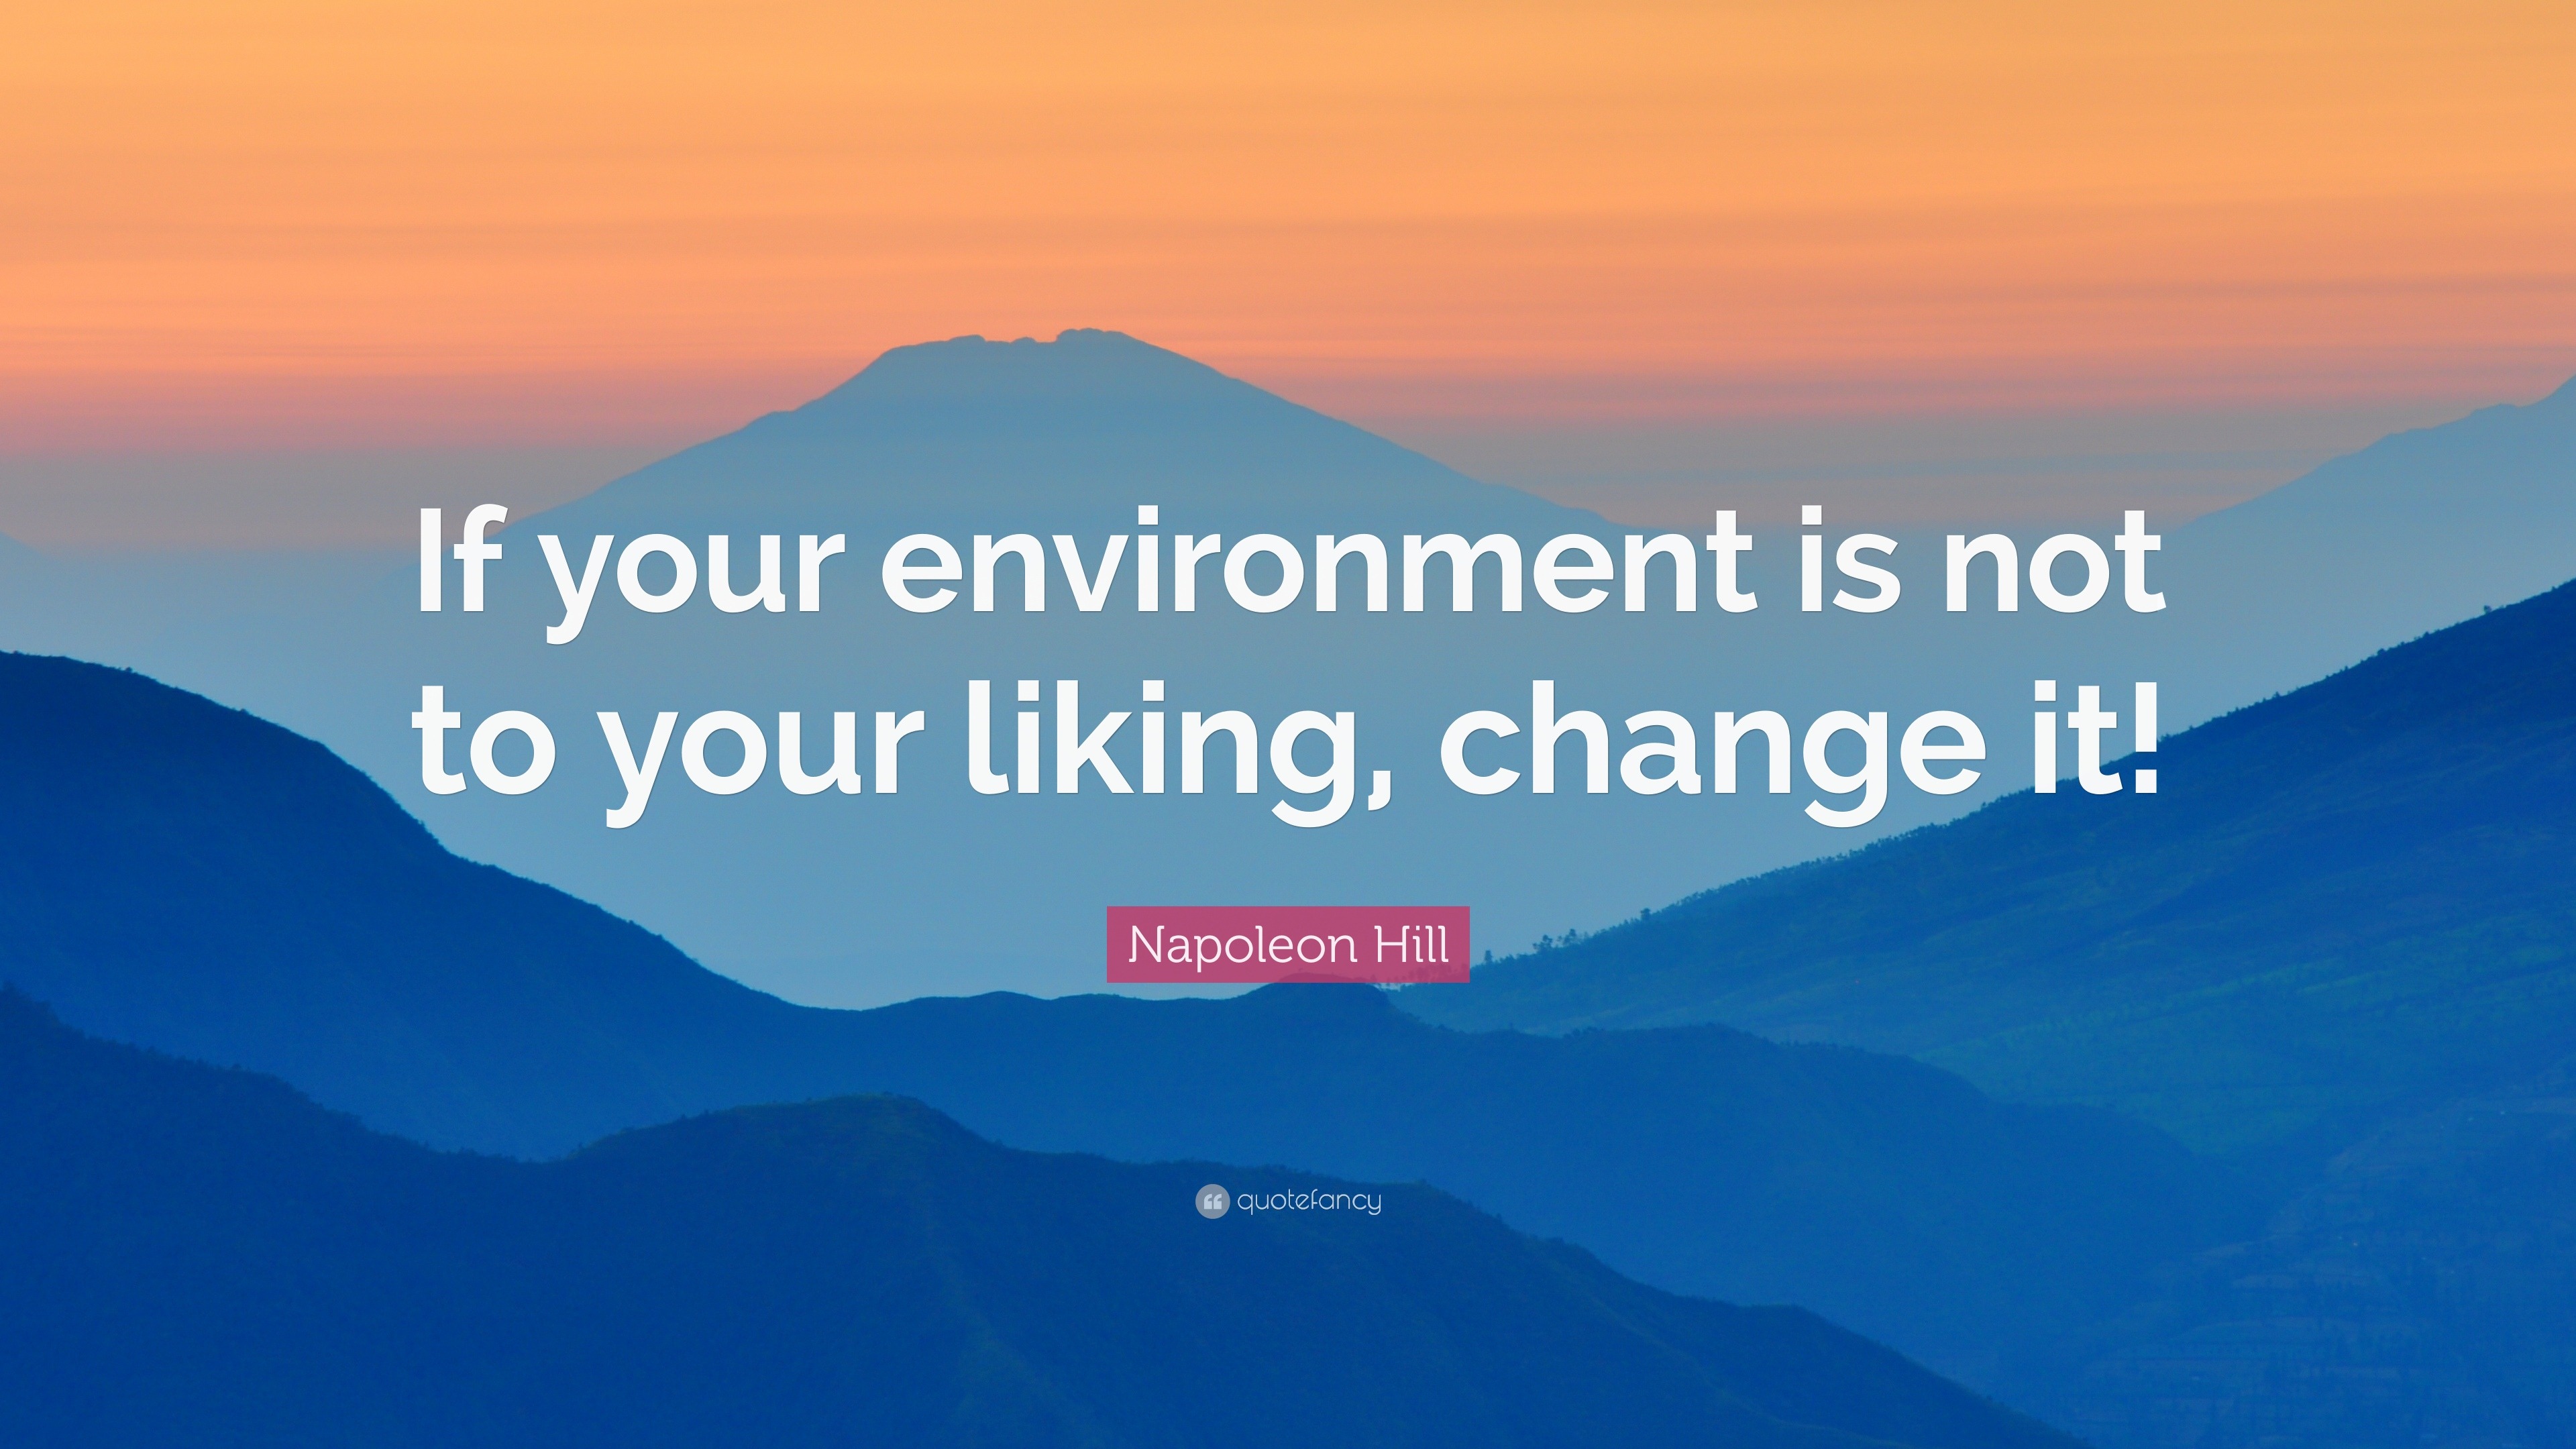 106376 Napoleon Hill Quote If your environment is not to your liking